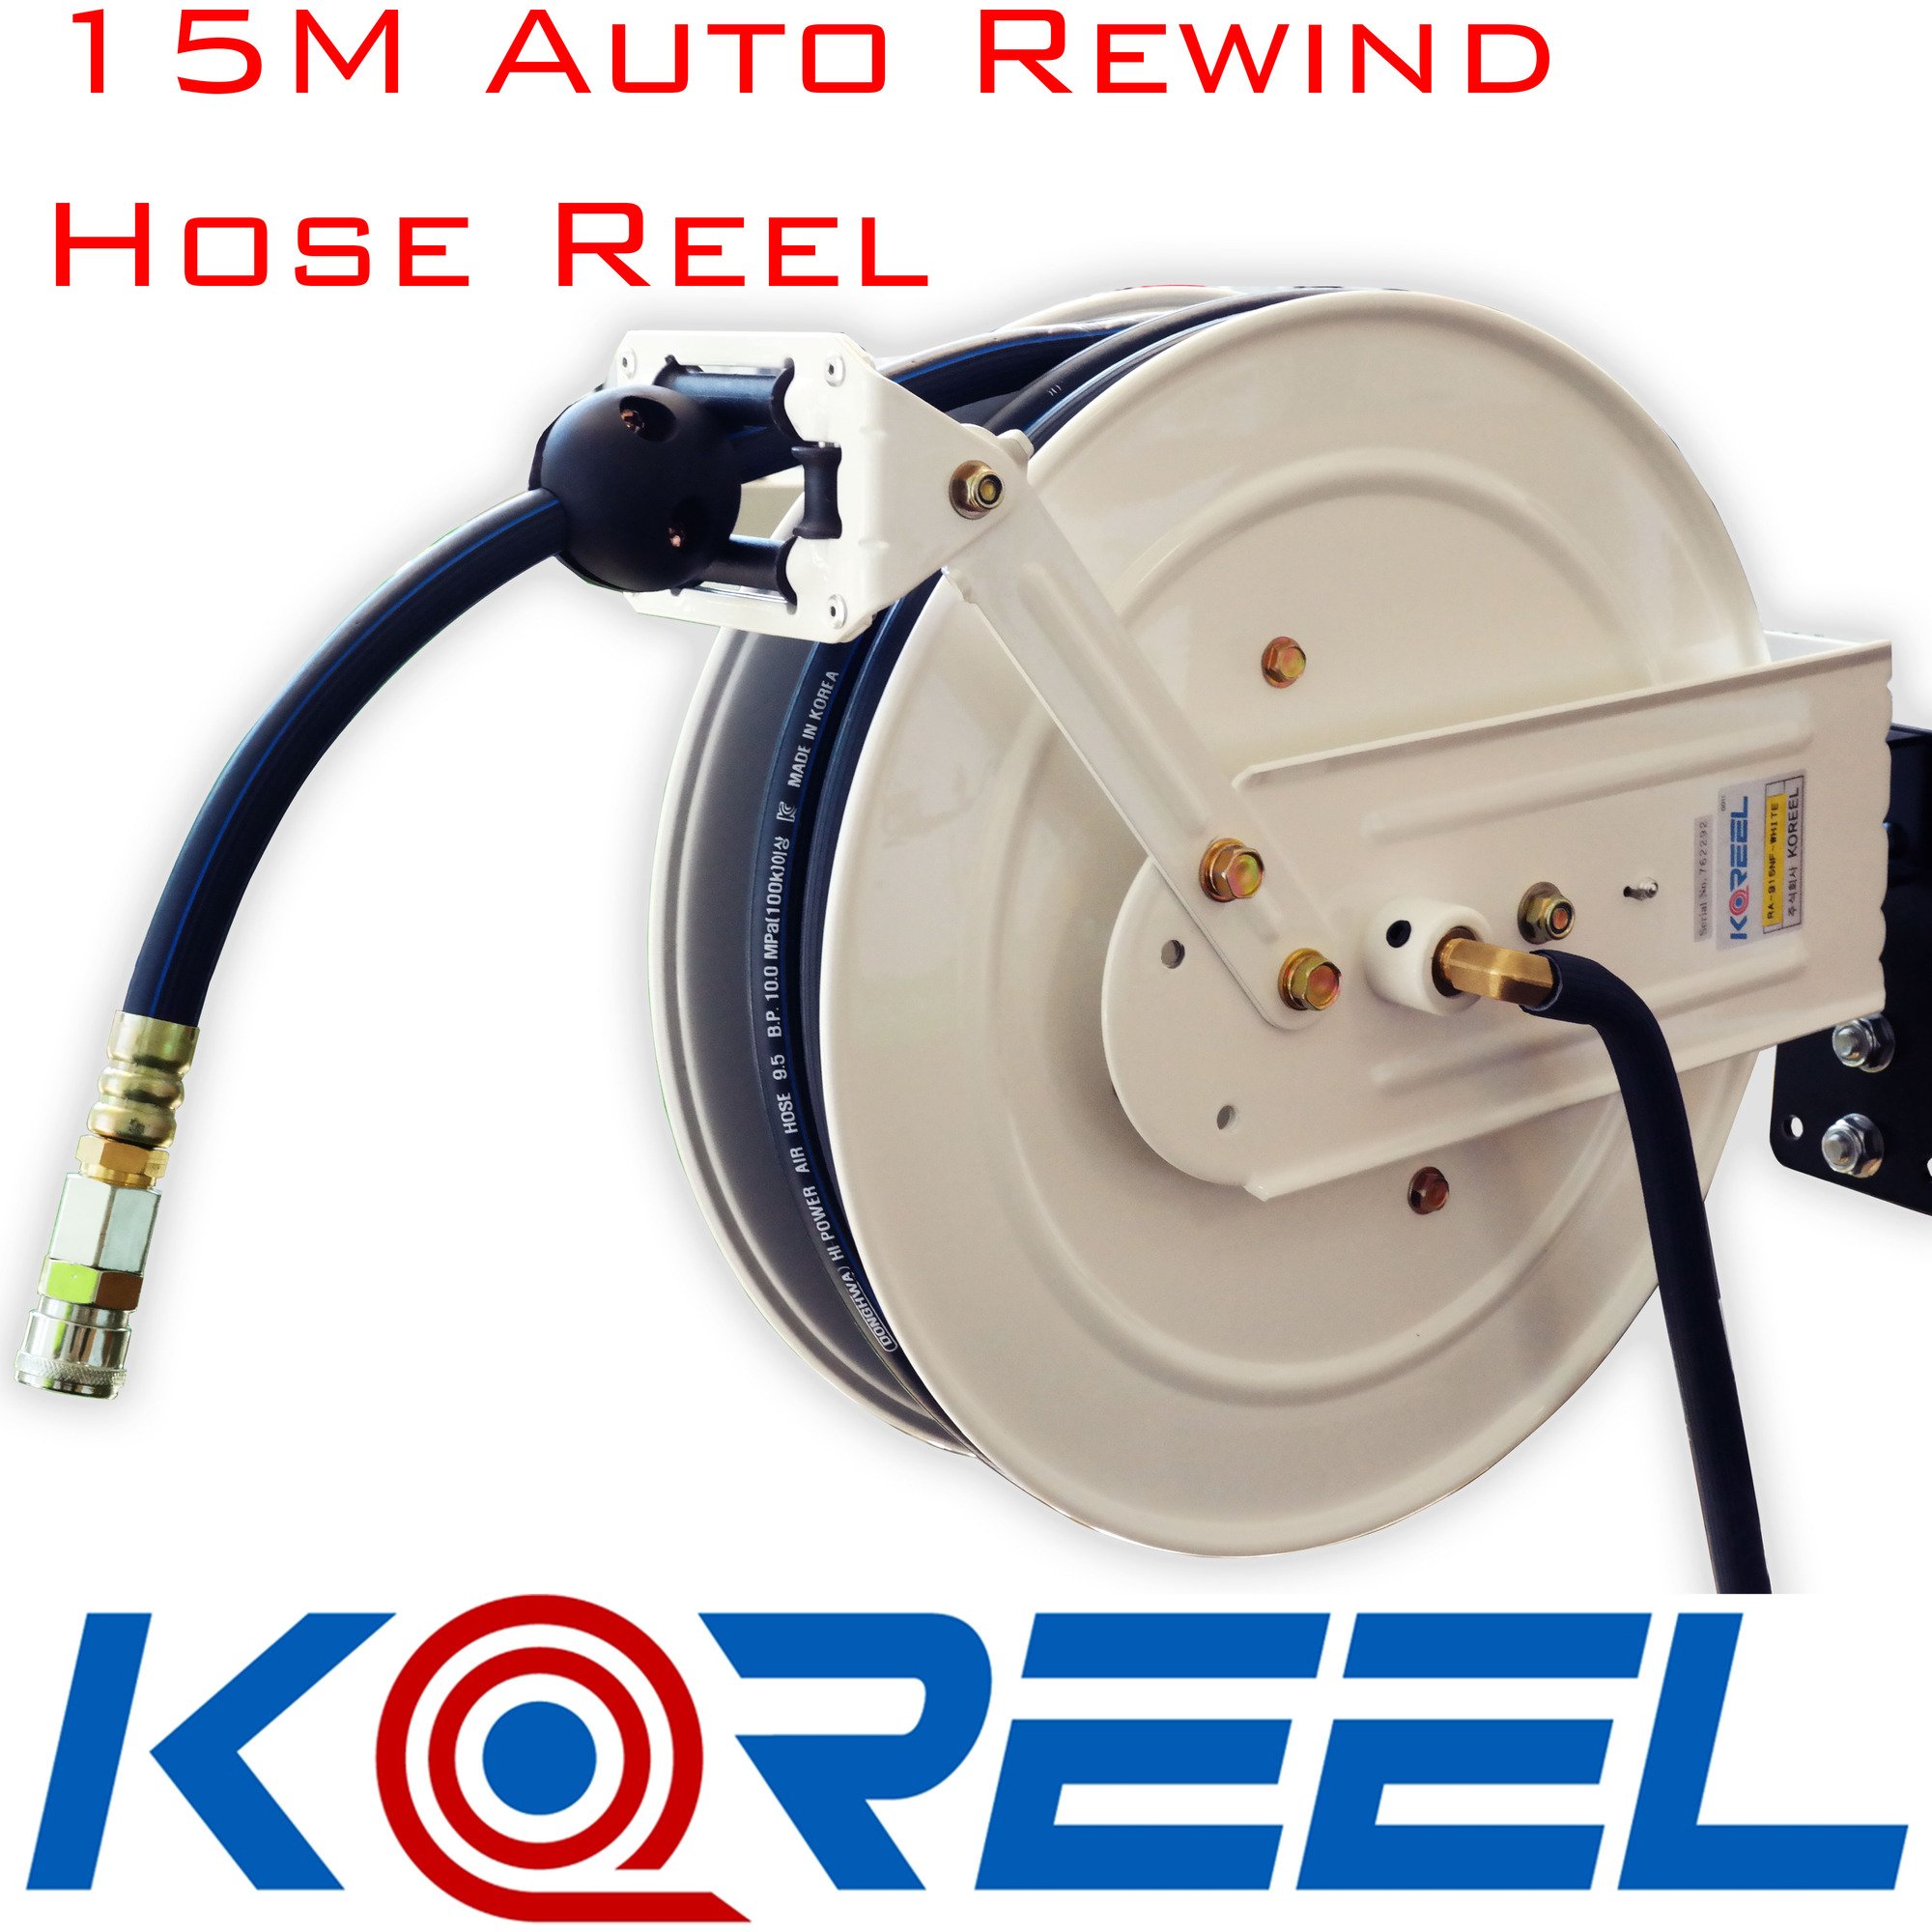 Koreel Heavy Duty Air Hose Reel With 15m of 9mm Hose with 1/4 Nitto Type  Fittings